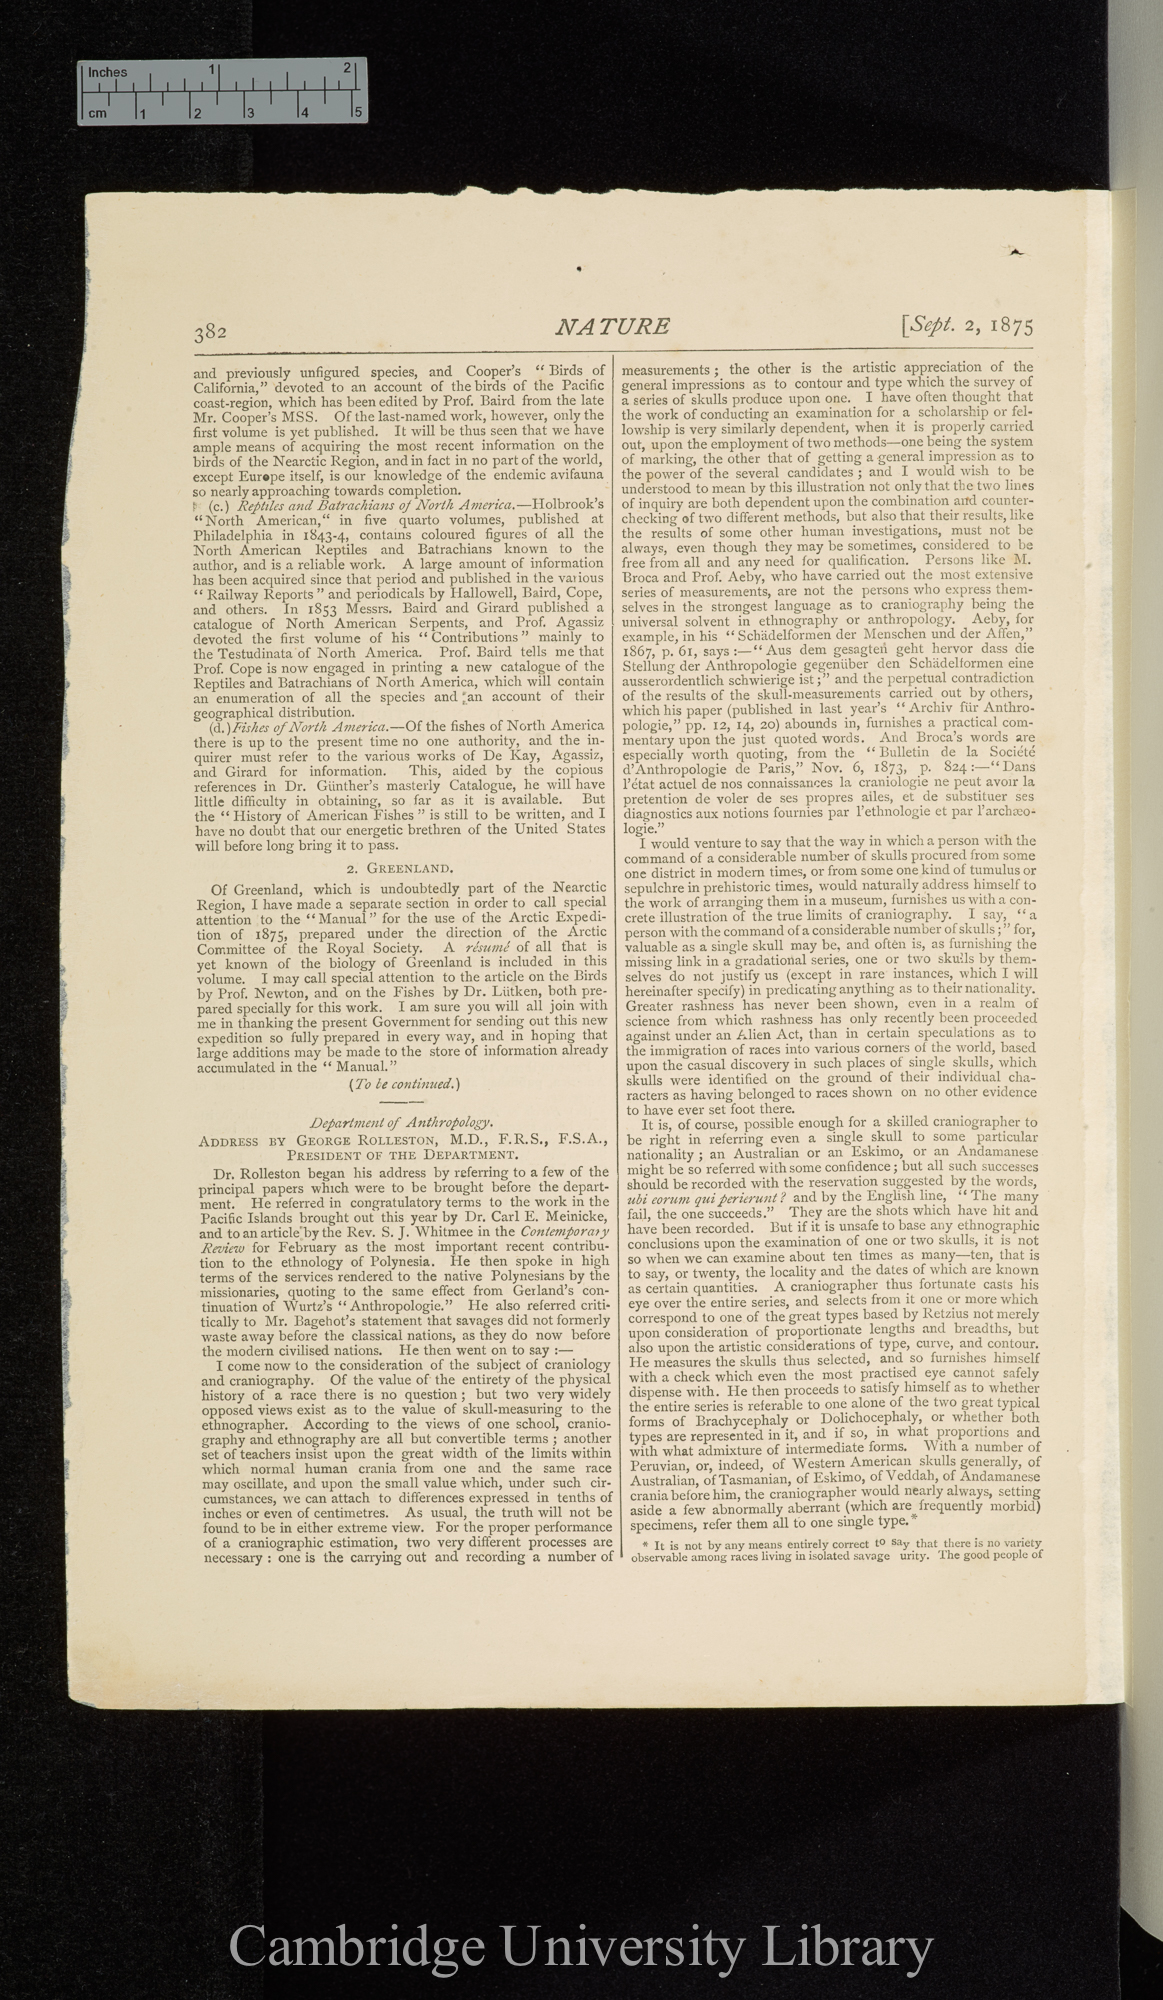 Address 25 August 1875 delivered to the biological section of the British Association: On the present state of our knowledge of geographical zoology &#39;Nature&#39; 12: 382